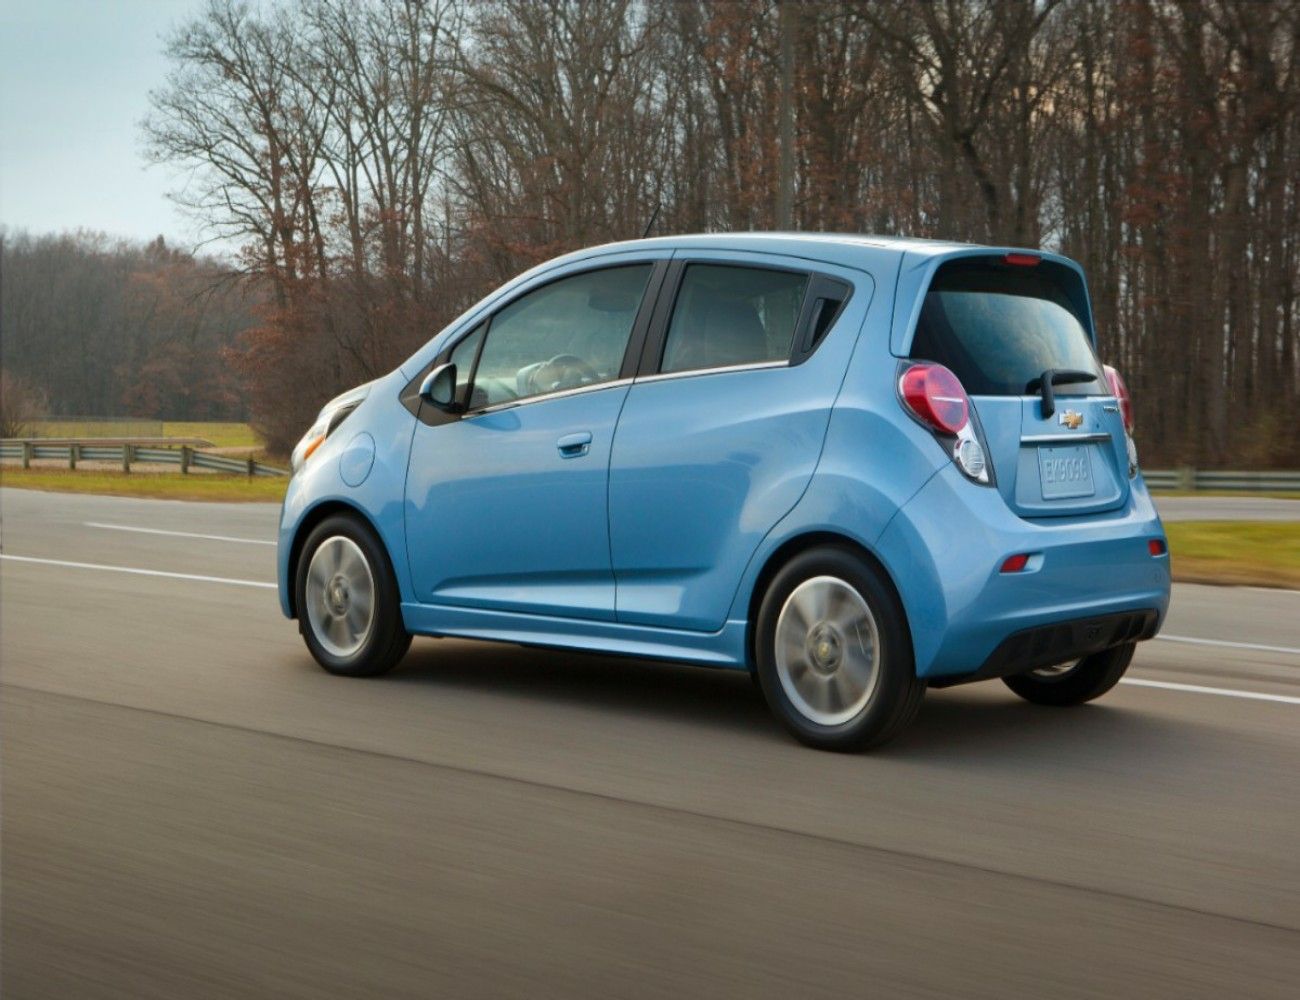 2014 Chevrolet Spark EV Electric Car: Now Europe Gets It Too